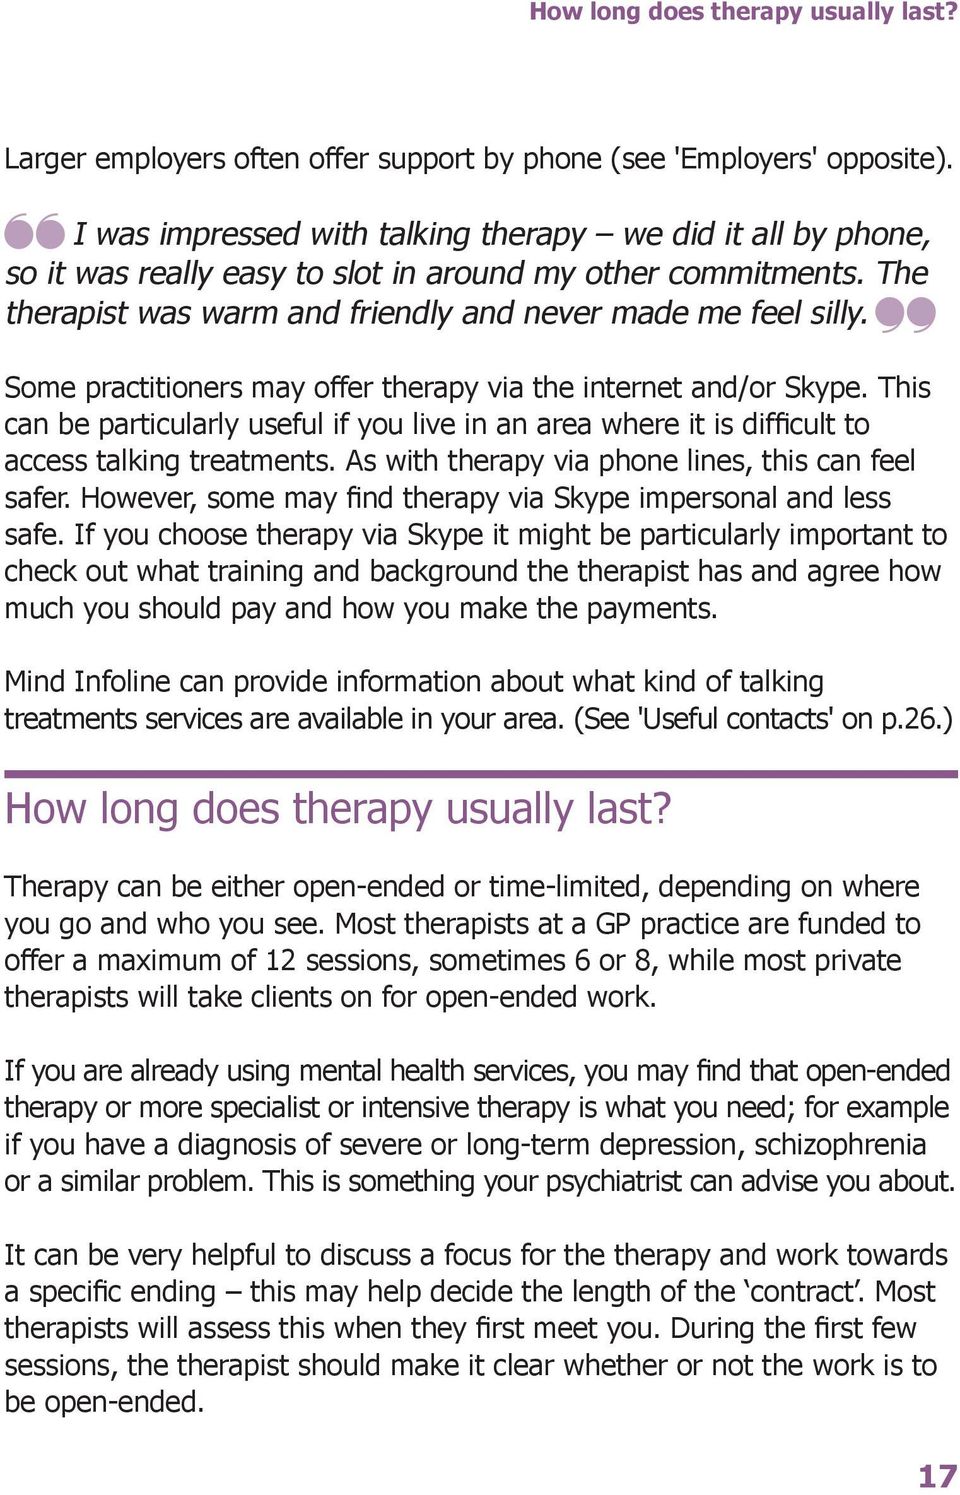 Some practitioners may offer therapy via the internet and/or Skype. This can be particularly useful if you live in an area where it is difficult to access talking treatments.